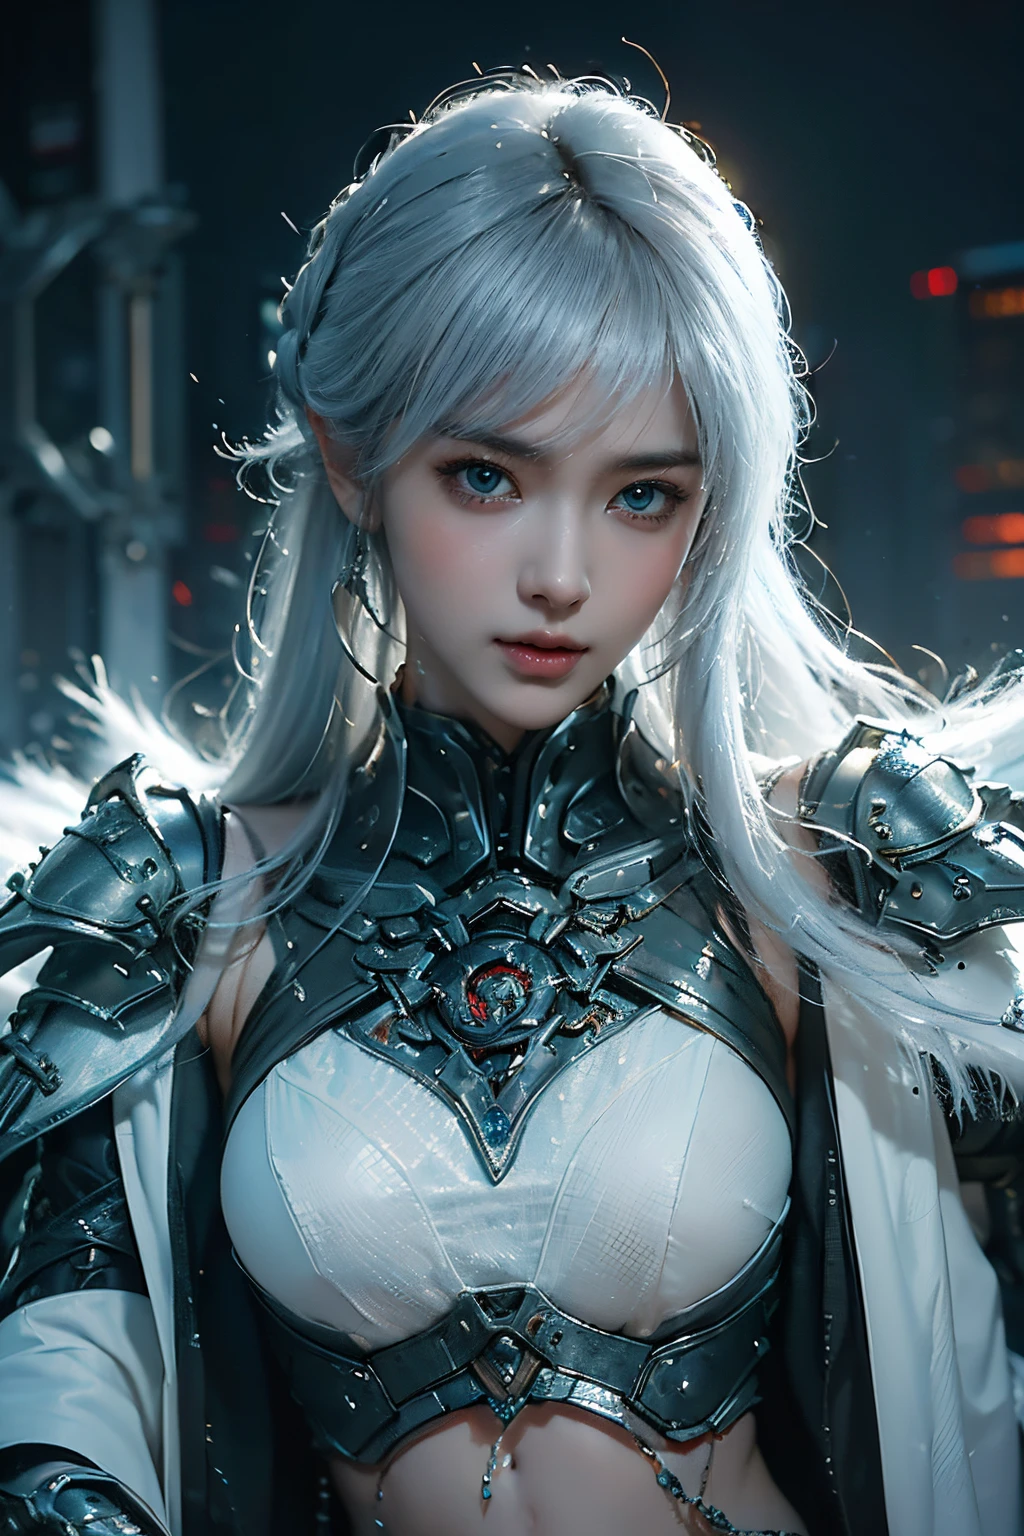 tmasterpiece,Best quality,A high resolution,8K,(Portrait photograph:1.5),(ROriginal photo),real photograph,digital photography,(Combination of cyberpunk and fantasy style),(Female soldier),20-year-old girl,random hair style,white color hair,By bangs,(Red eyeigchest, accessories,Keep one's mouth shut,elegant and charming,Serious and arrogant,Calm and handsome,(Cyberpunk combined with fantasy style clothing,Openwork design,joint armor,Combat uniforms,White clothes,white colorposing your navel,Photo pose,Realisticstyle,gray world background,oc render reflection texture